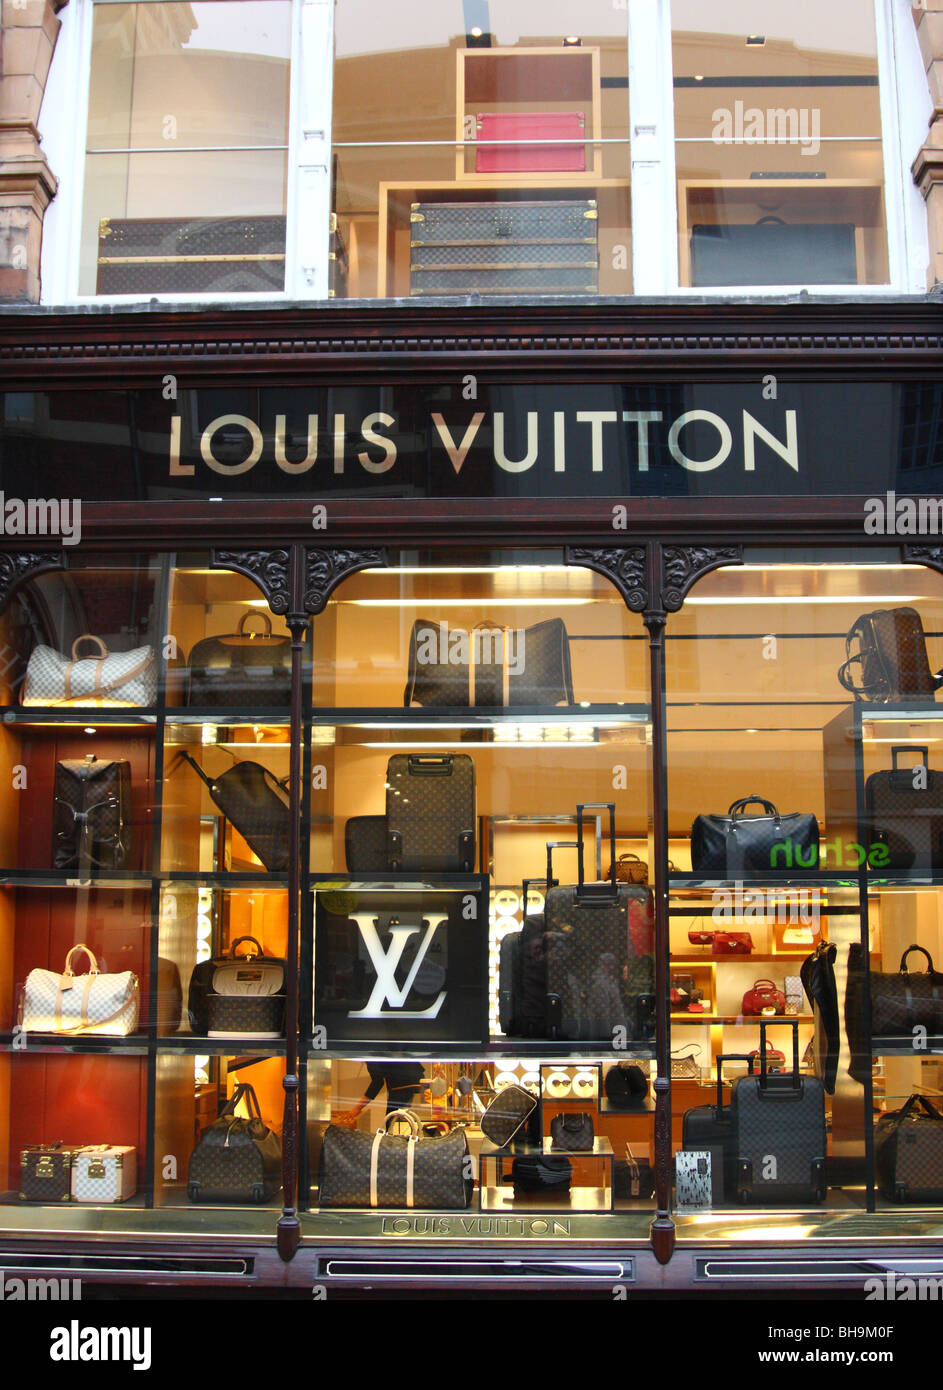 louis vuitton outlet store in uk